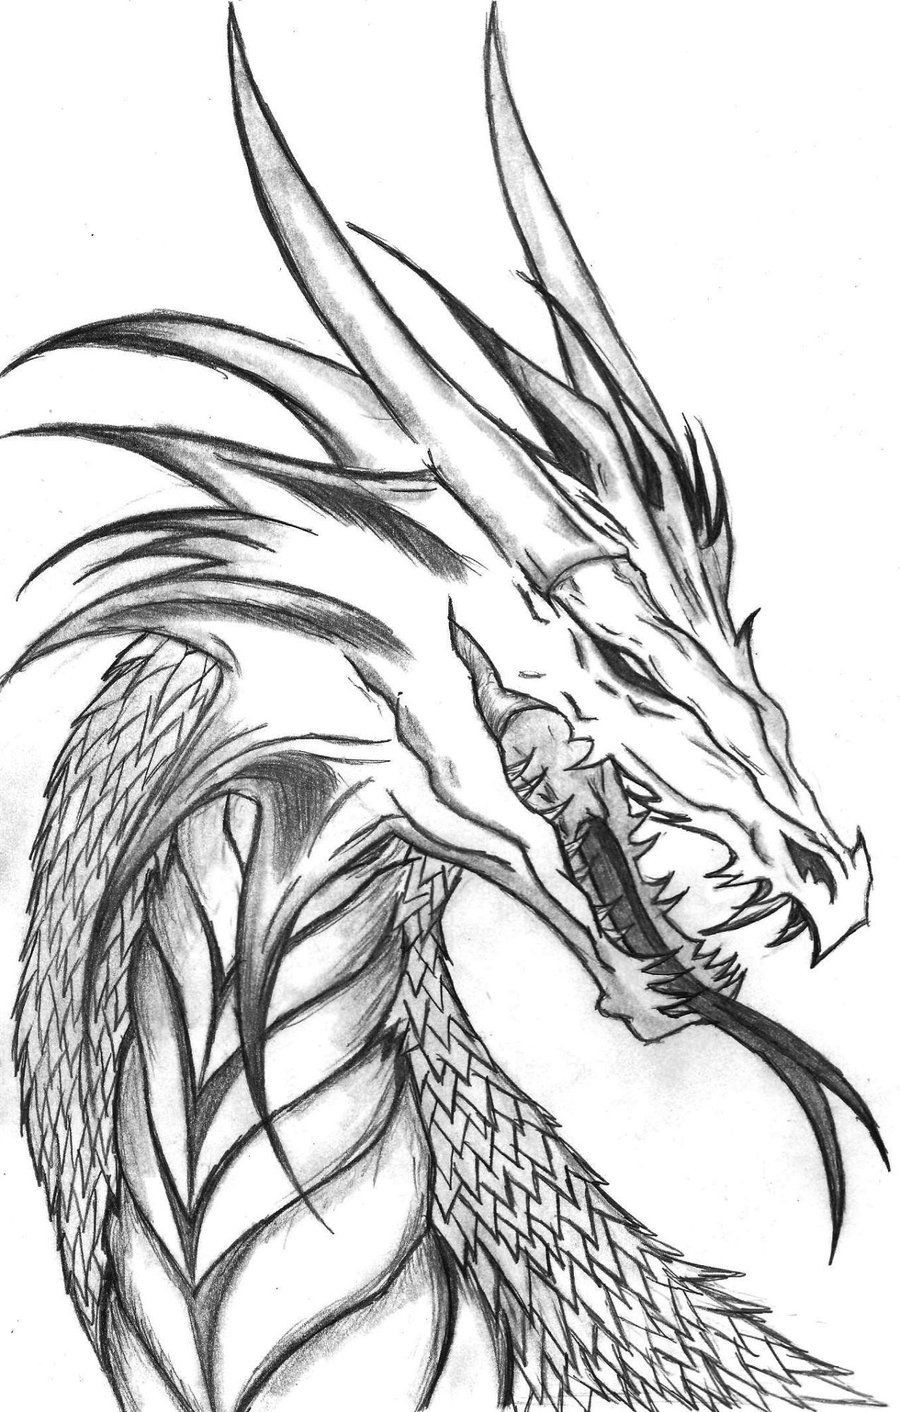 Scary Dragon Coloring Pages at GetDrawings | Free download